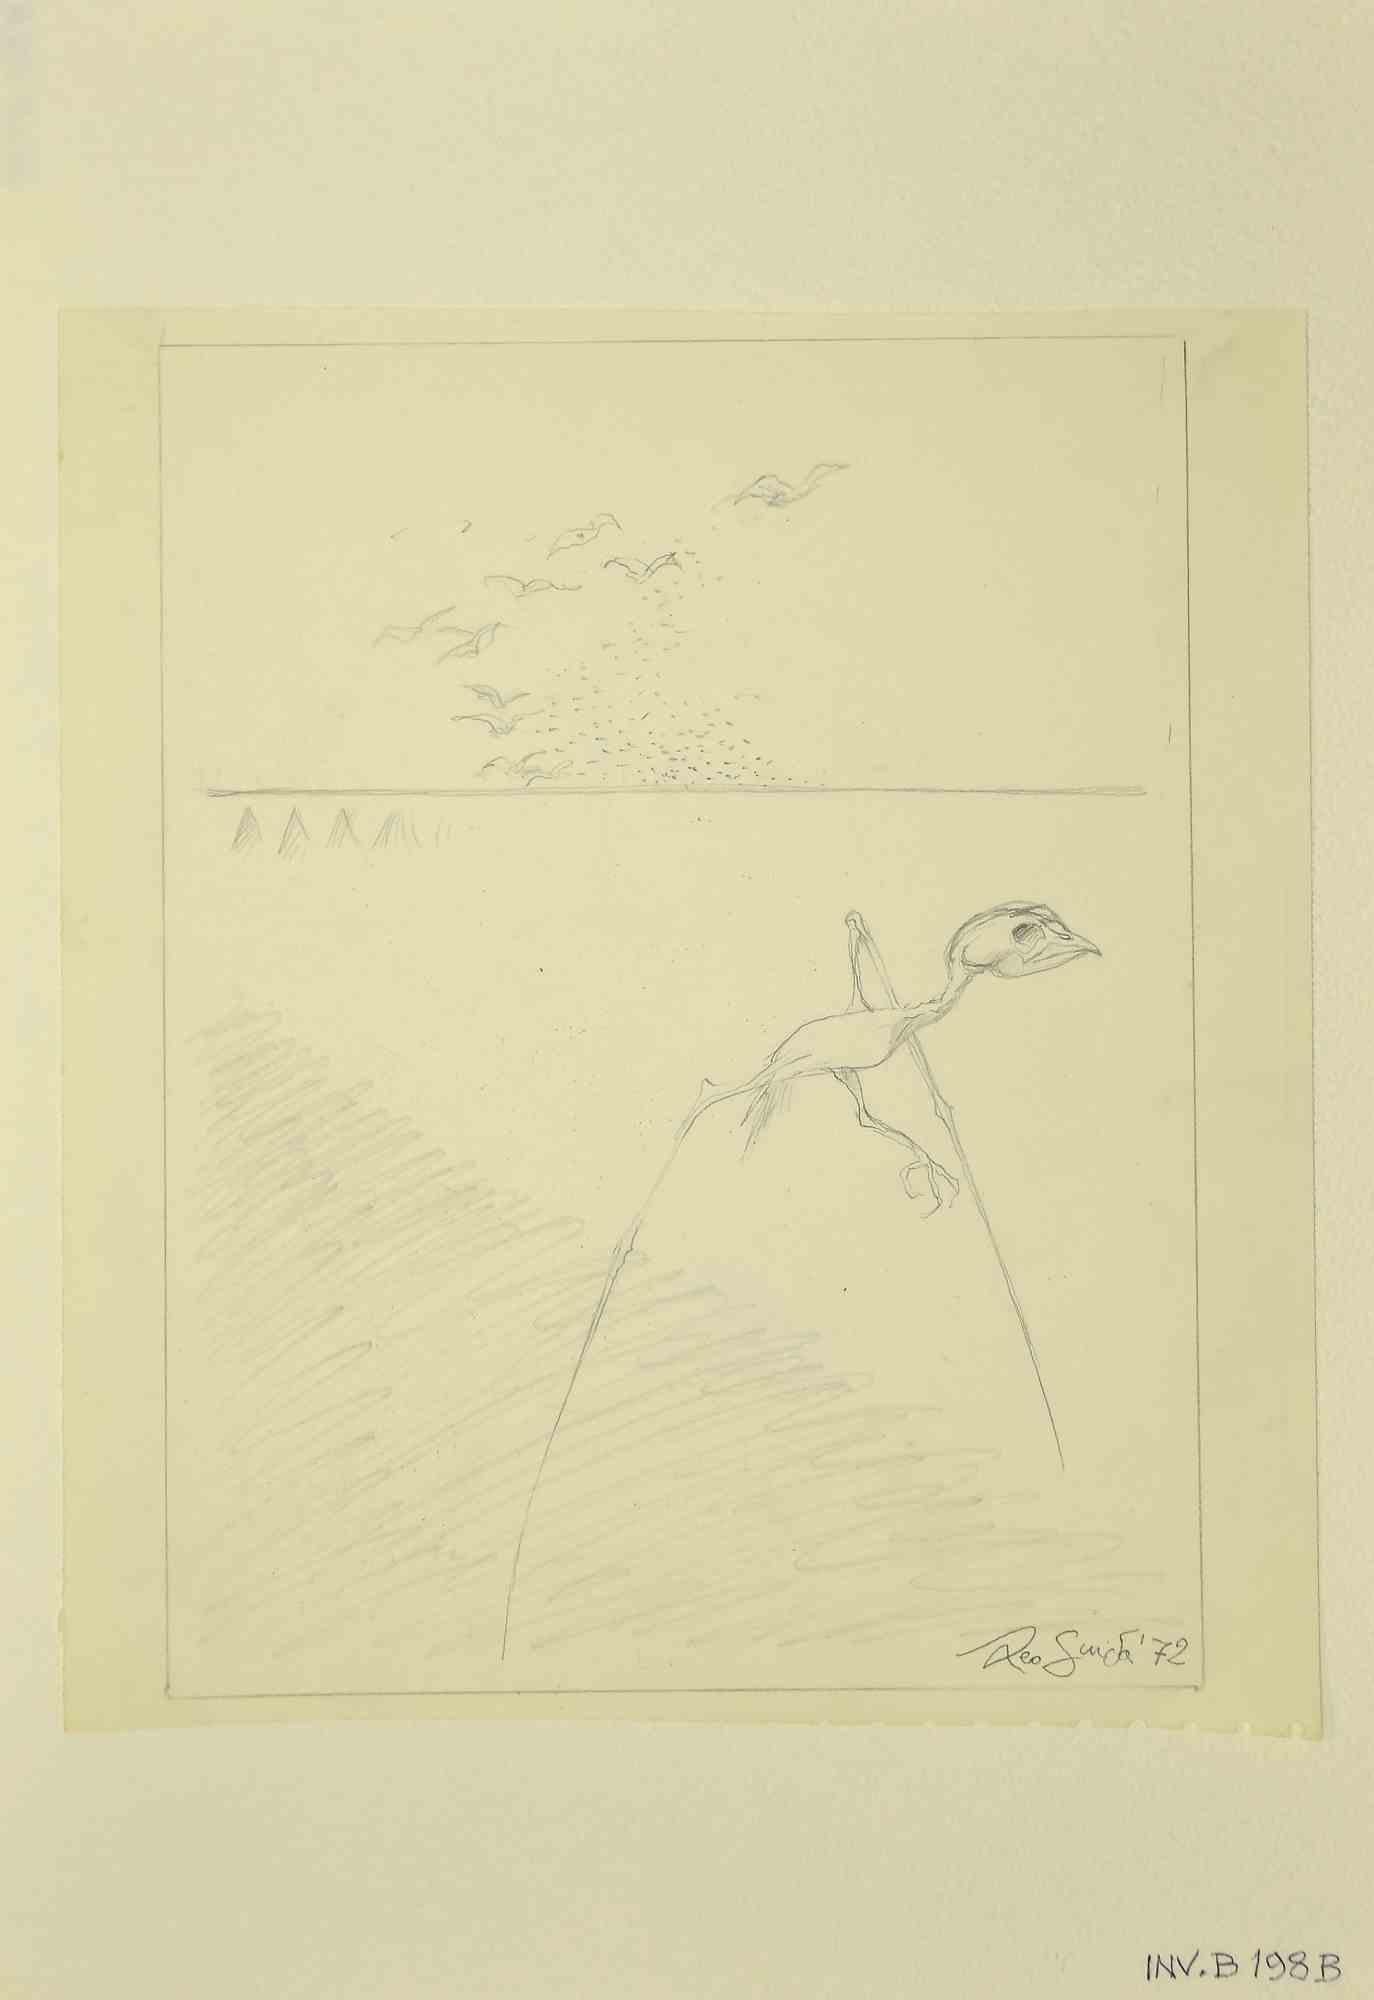 Spider Bird is an original drawing in pencil on paper realized by Leo Guida in 1972.

Good condition.

Leo Guida  (1992 - 2017). Sensitive to current issues, artistic movements and historical techniques, Leo Guida has been able to weave with many